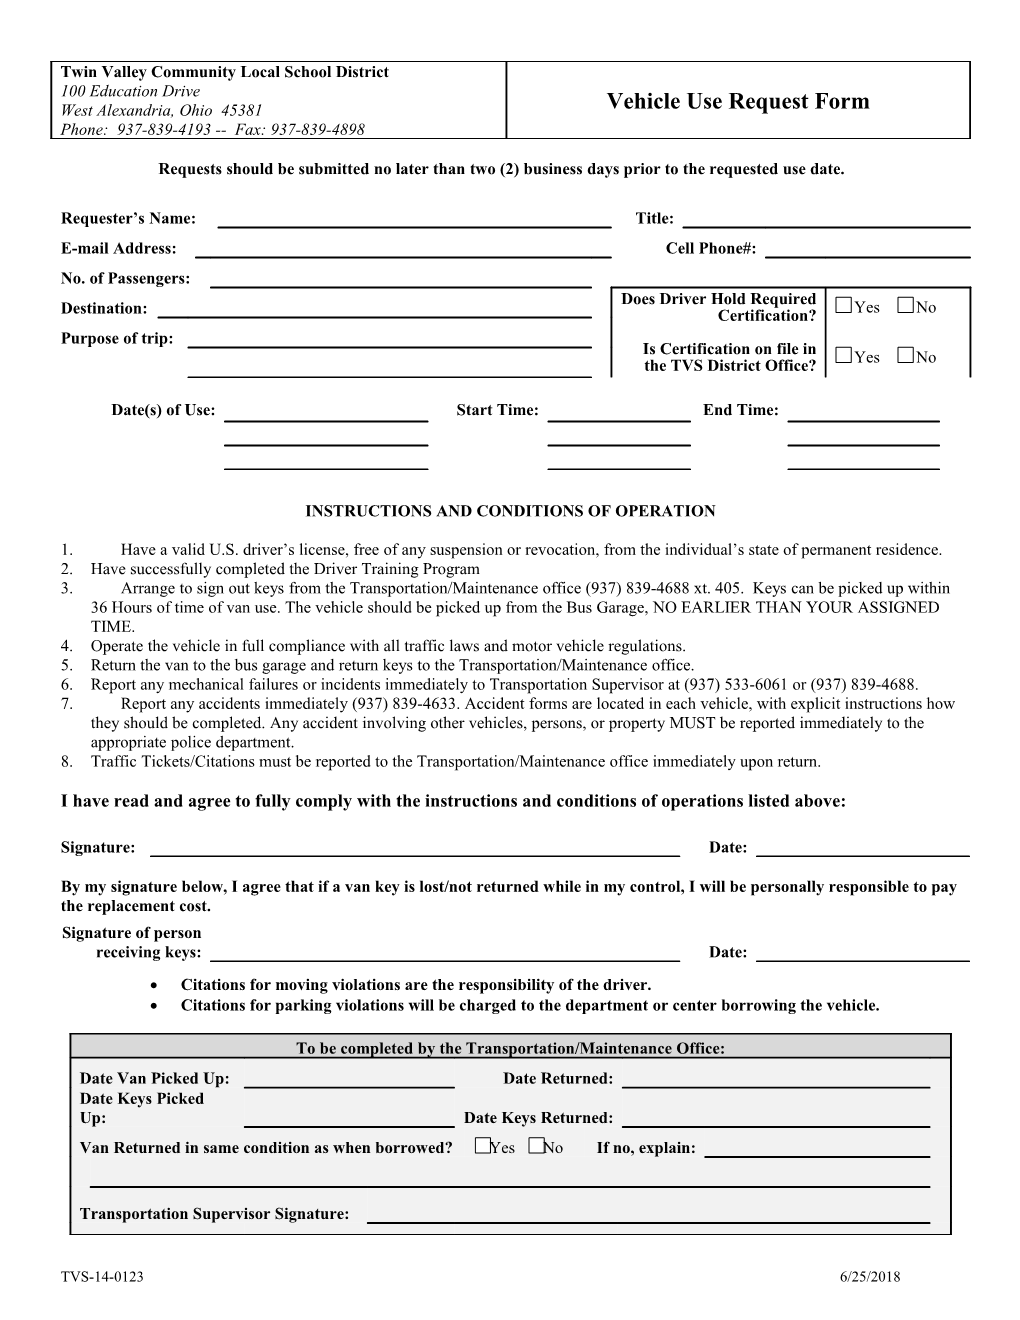 Vehicle Use Request Form